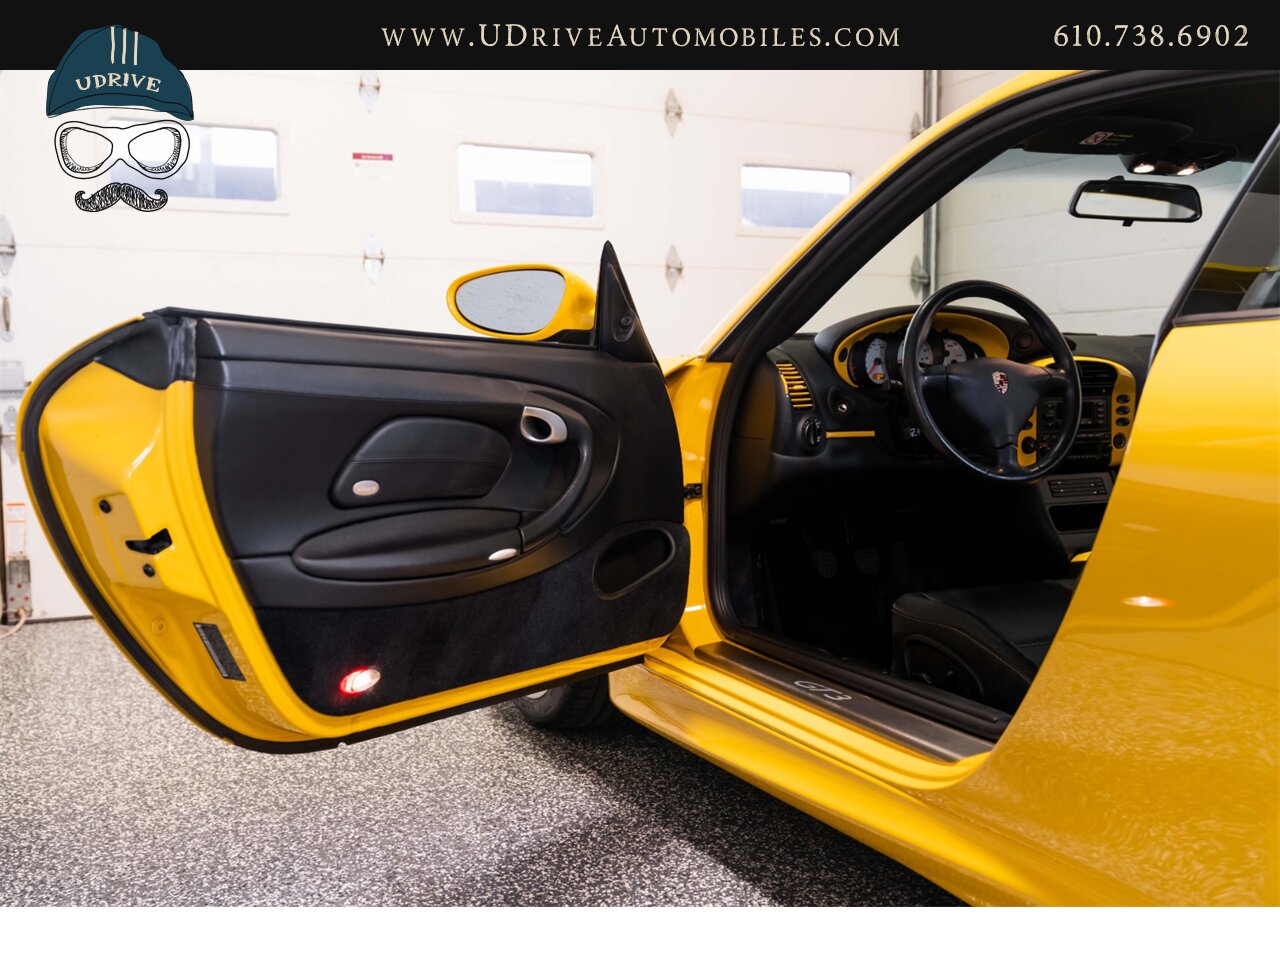 2005 Porsche 911 GT3 996 Speed Yellow Sport Seats Pntd Hardbacks  Pntd Console Deviating Stitch Yellow Accents Throughout - Photo 29 - West Chester, PA 19382